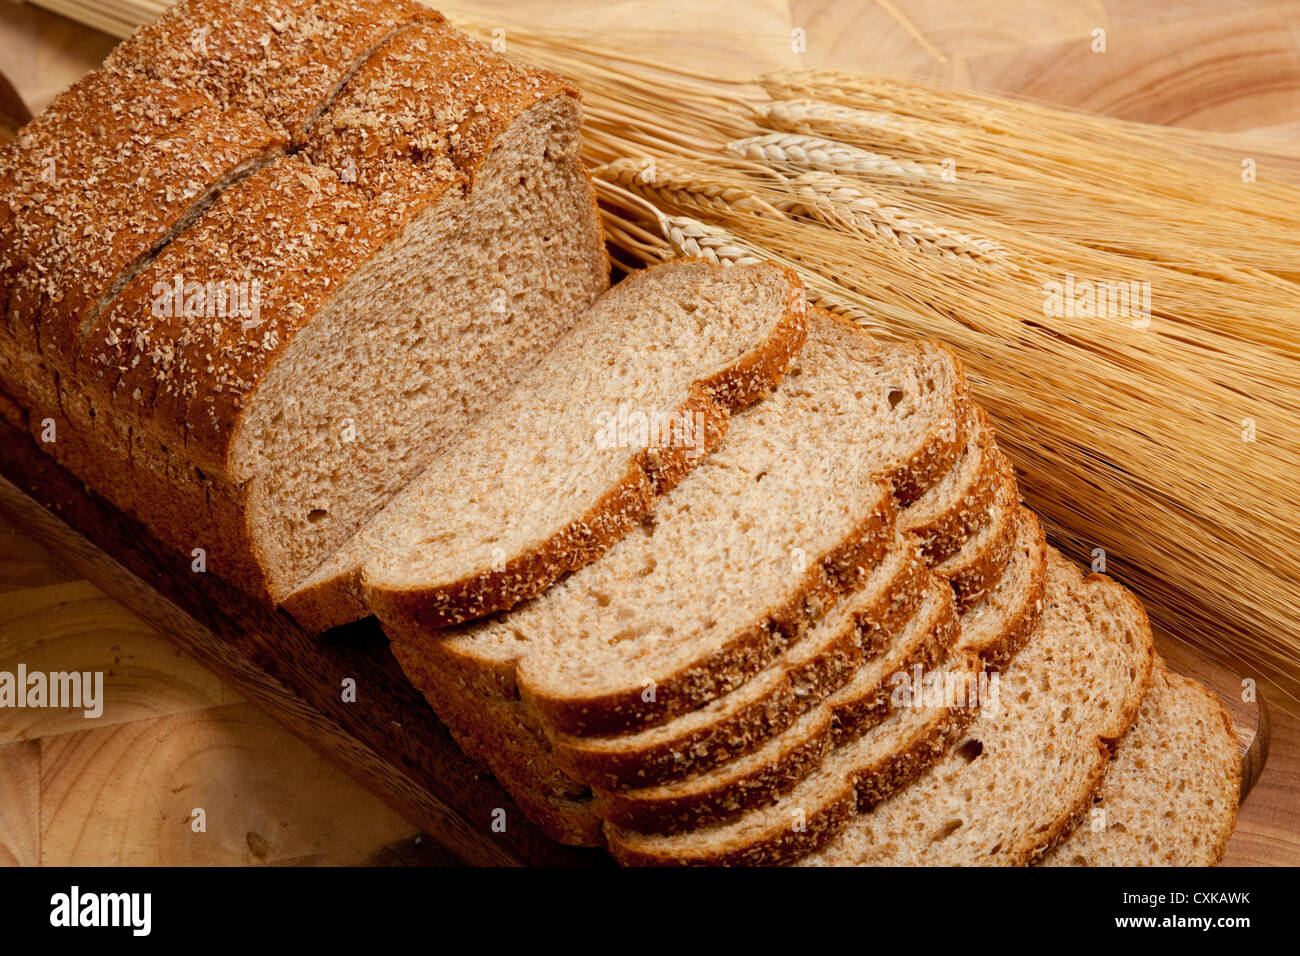 Loaf of wheat bread and shocks of wheat Stock Photo